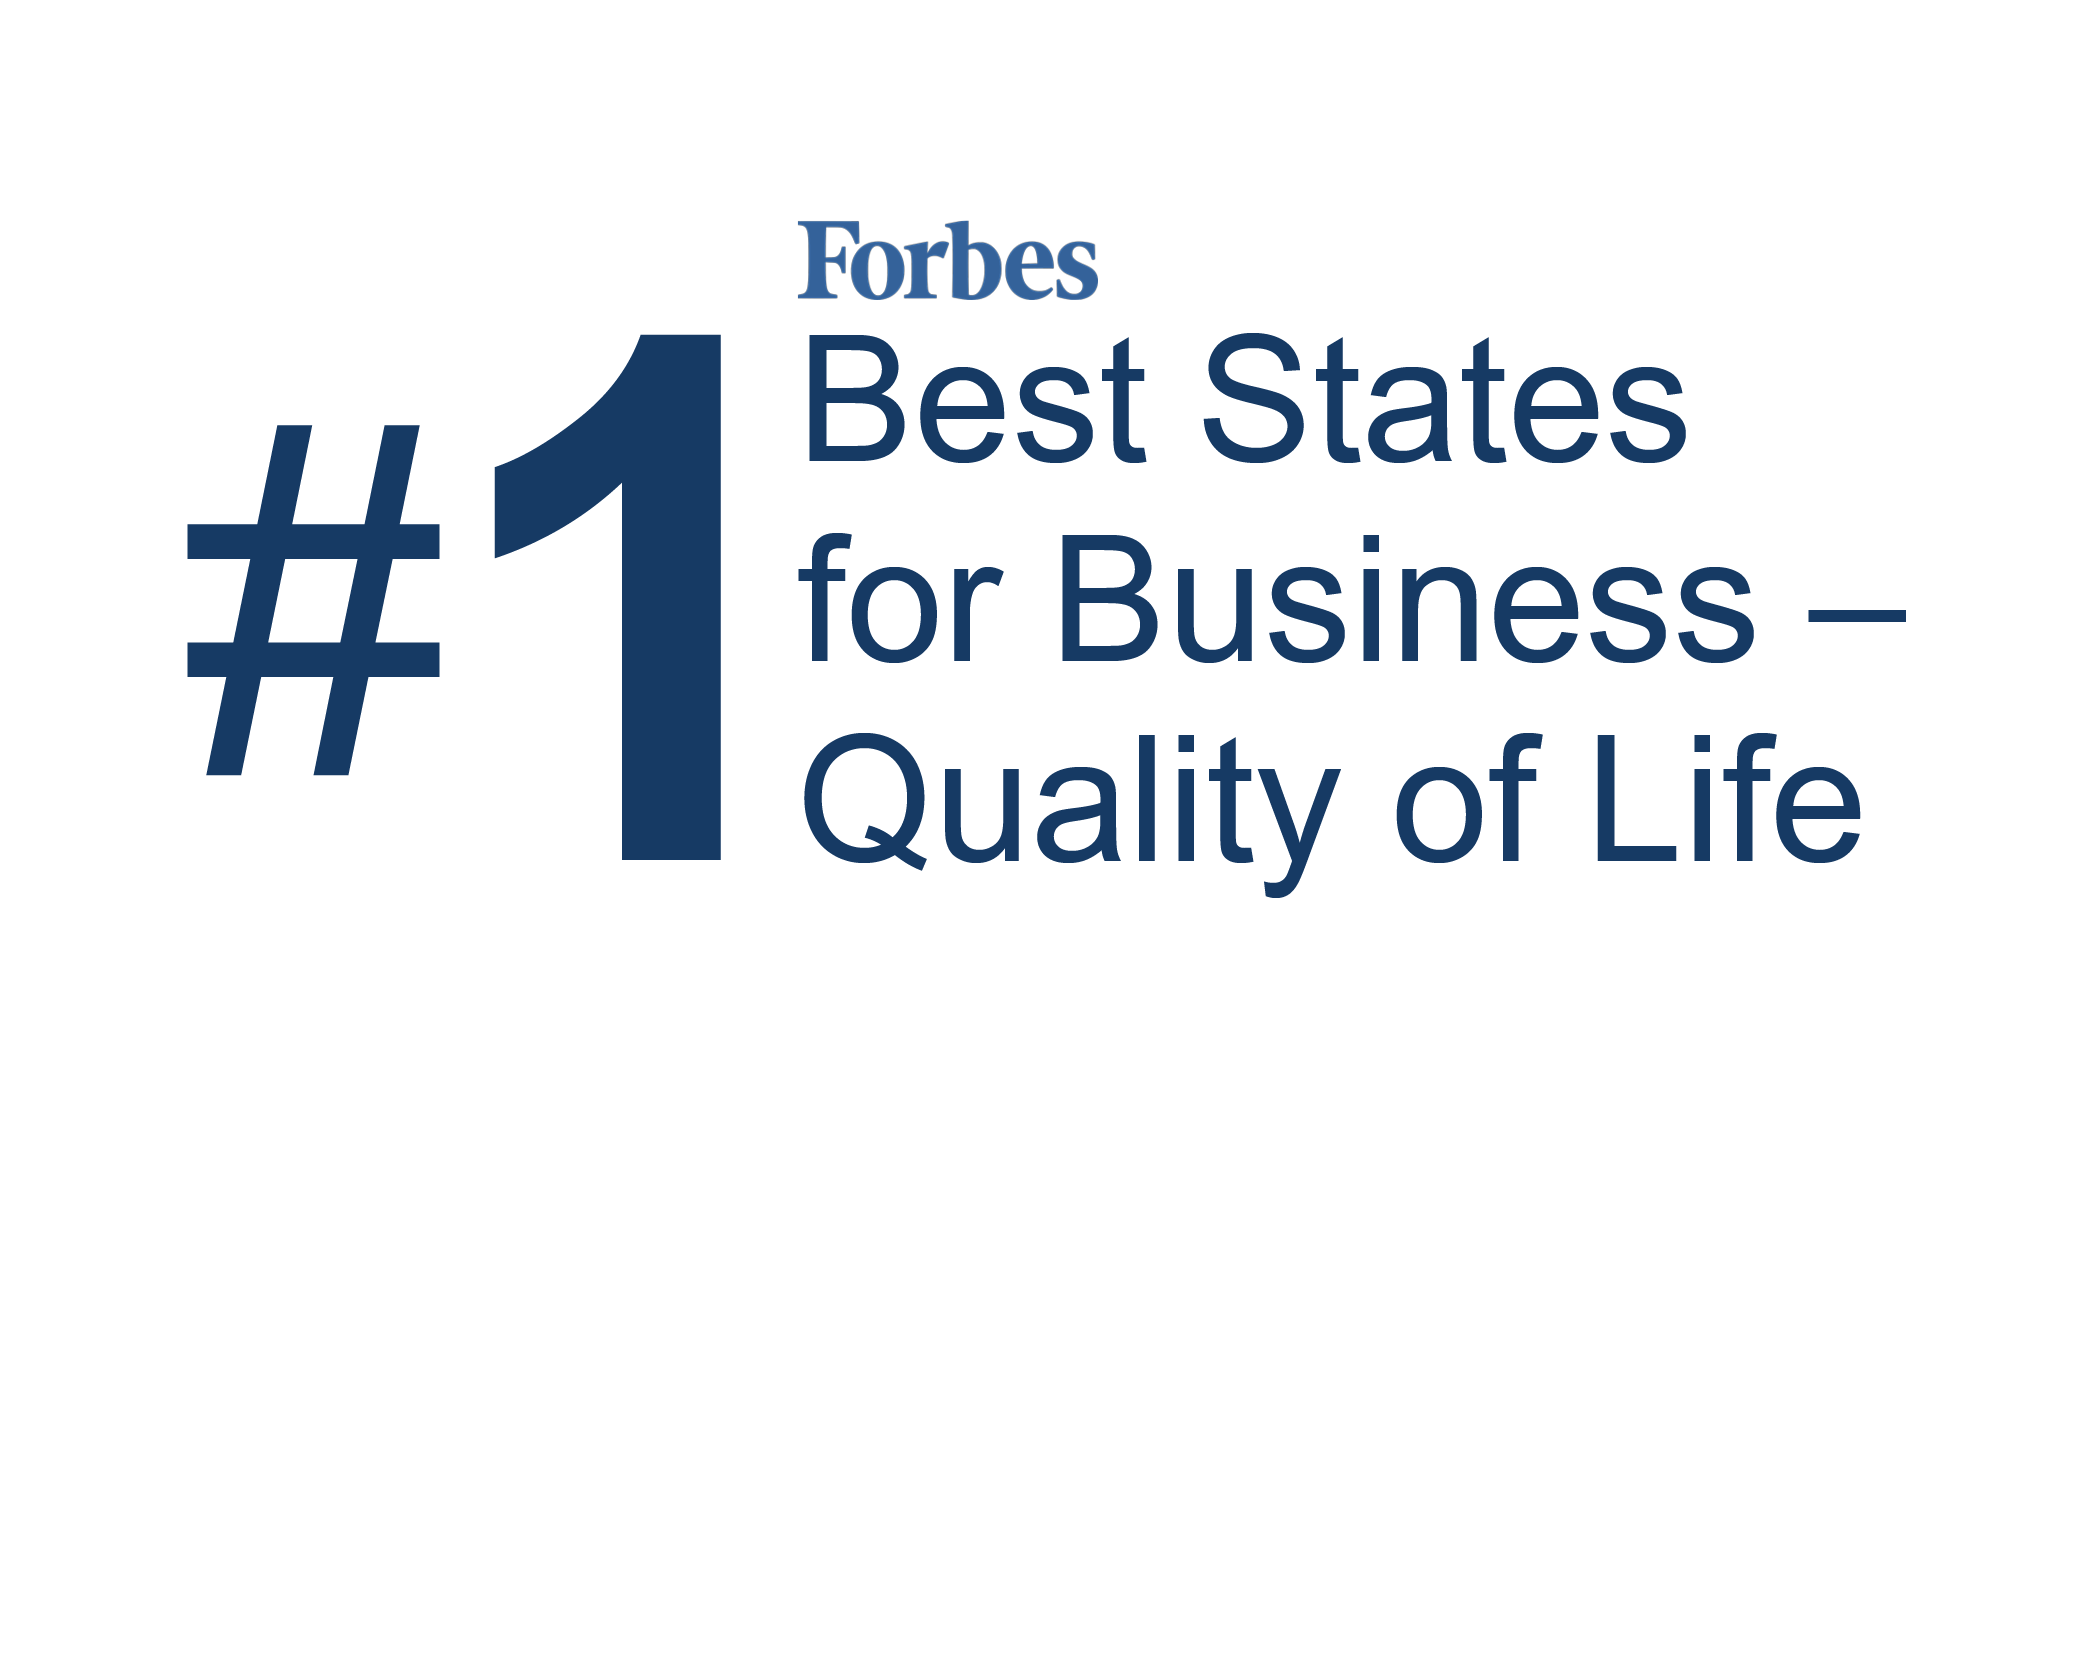 Forbes_#1_Best States for Business - Quality of Life